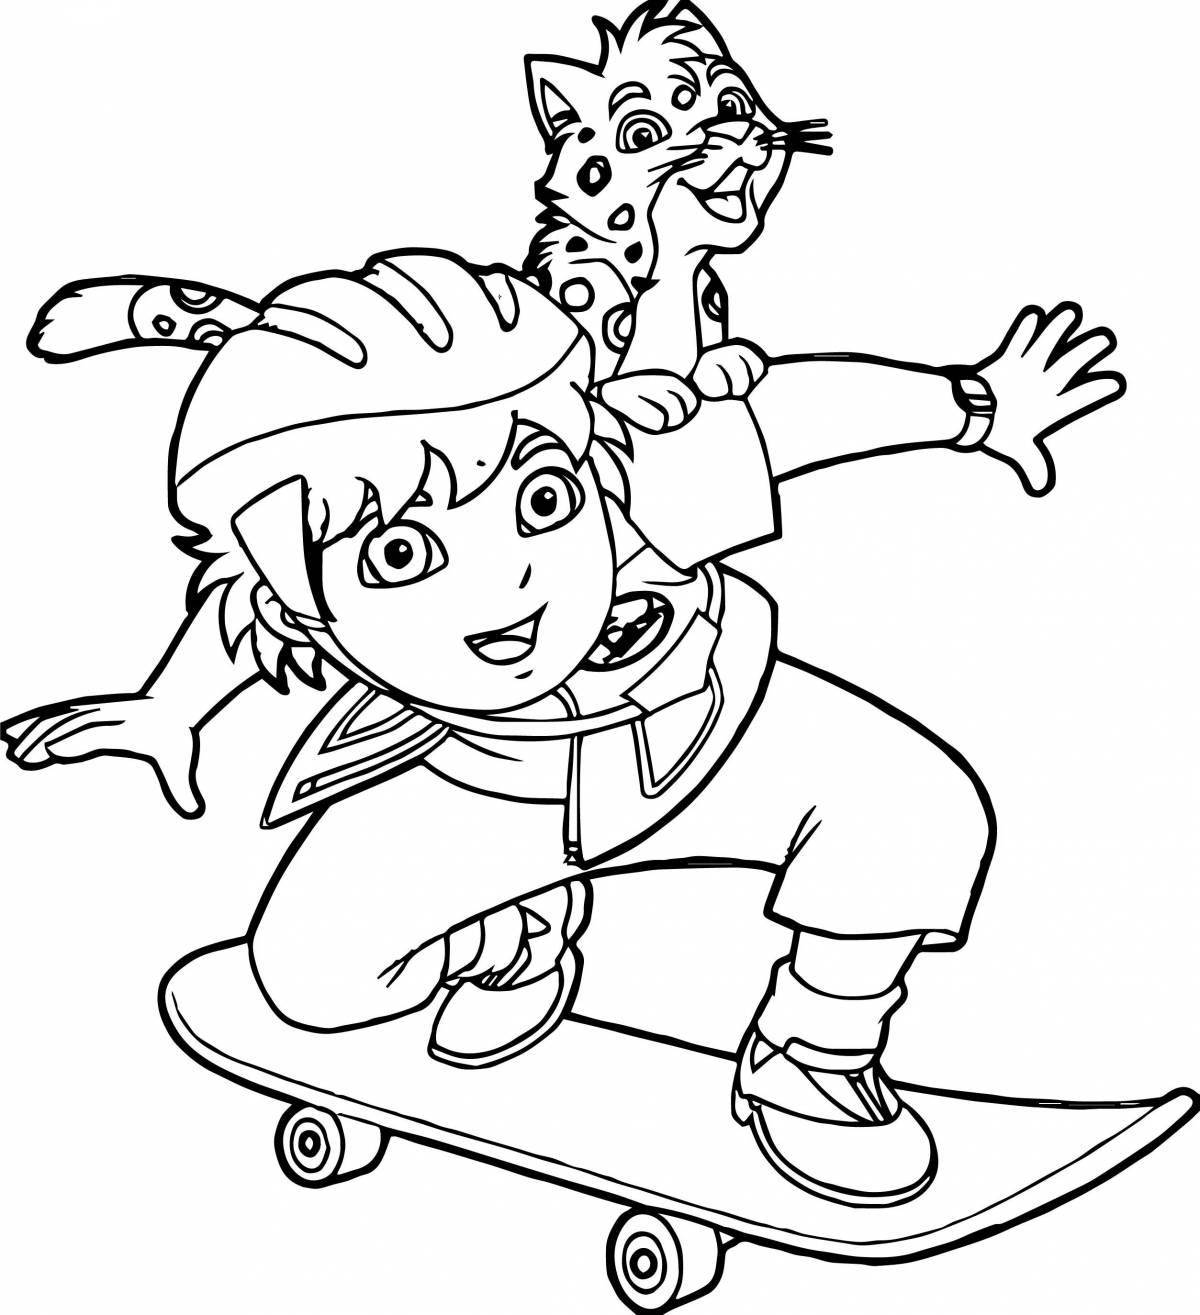 Diego colorful coloring page